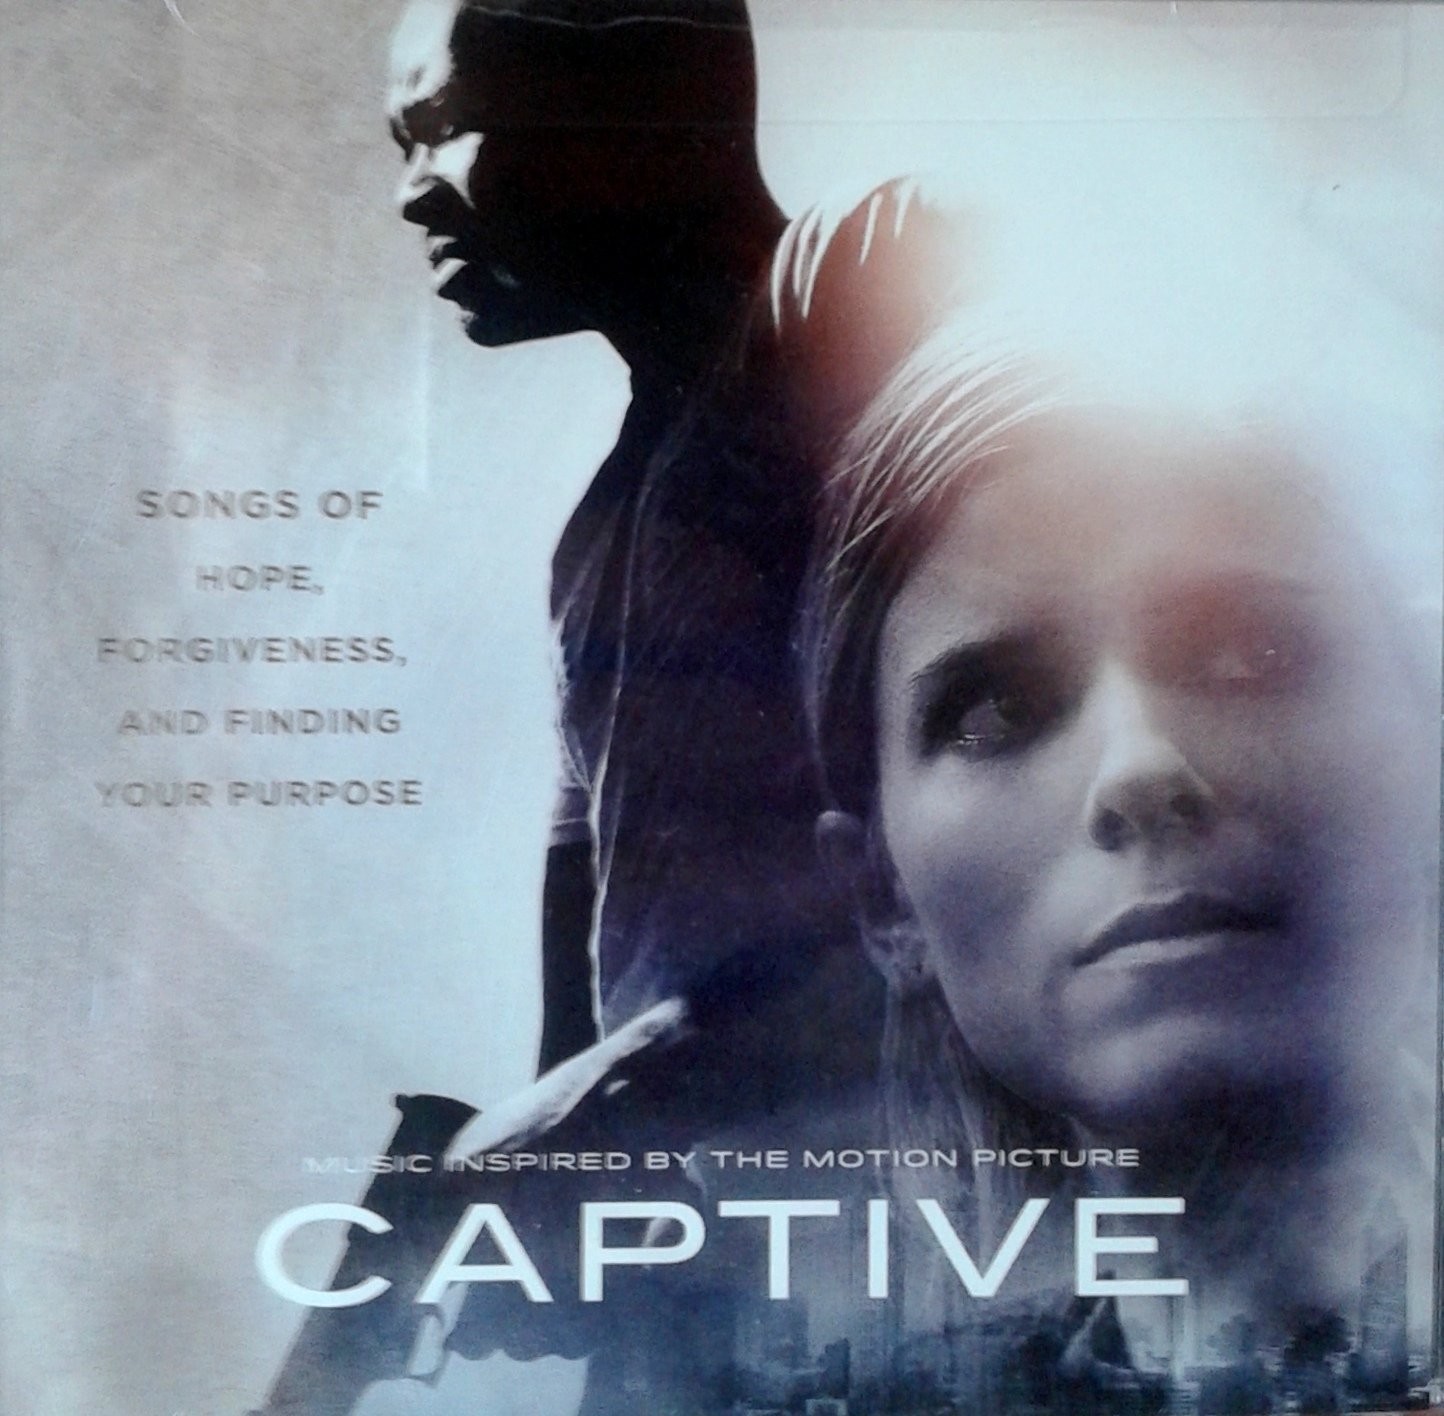 Captive: music inspired by the moti